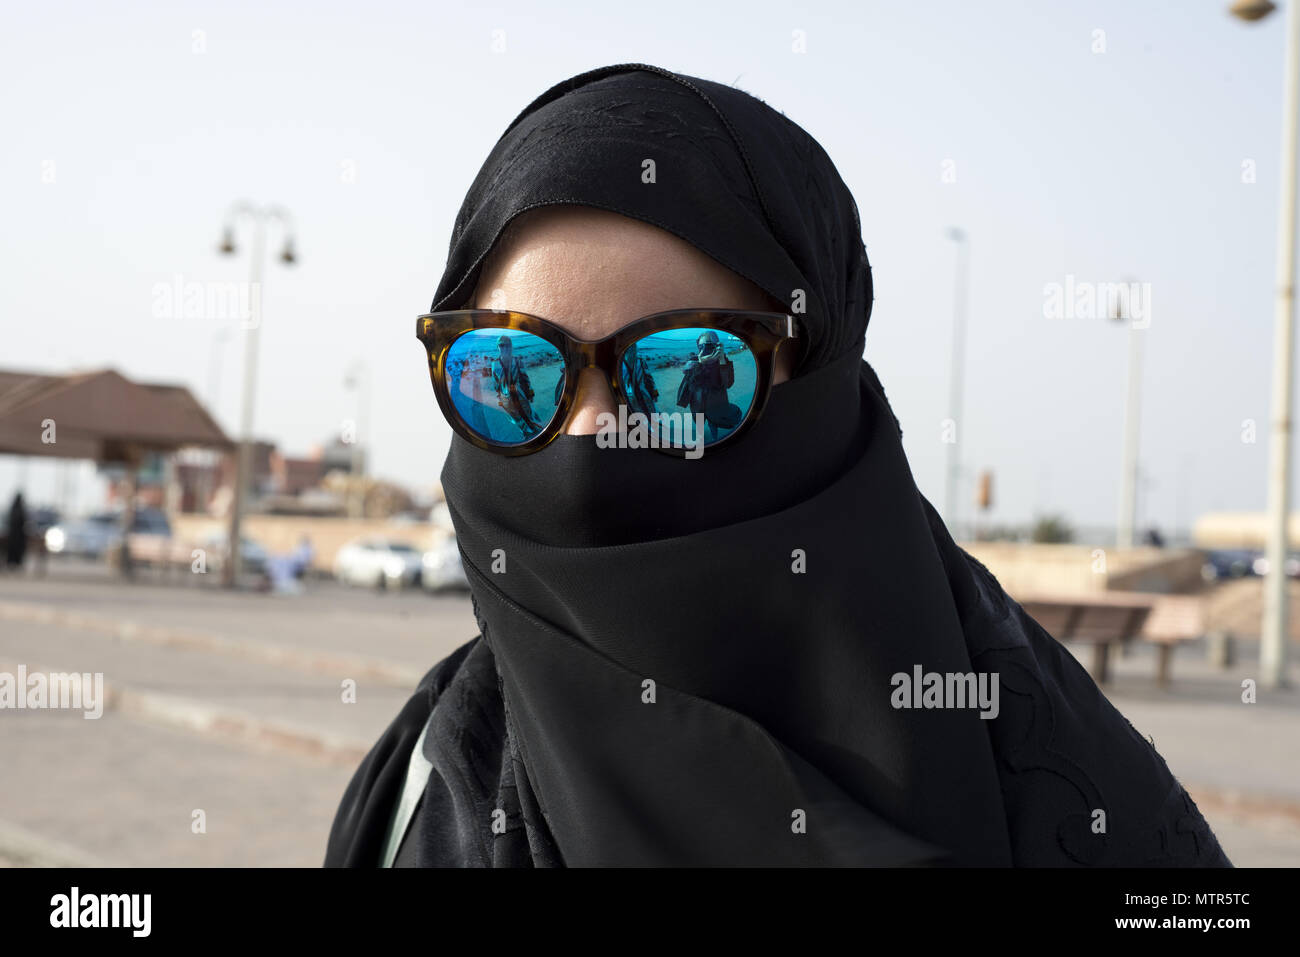 A Saudi woman wearing a black abaya and hijab protects her eyes from the sun with blue sunglasses Stock Photo